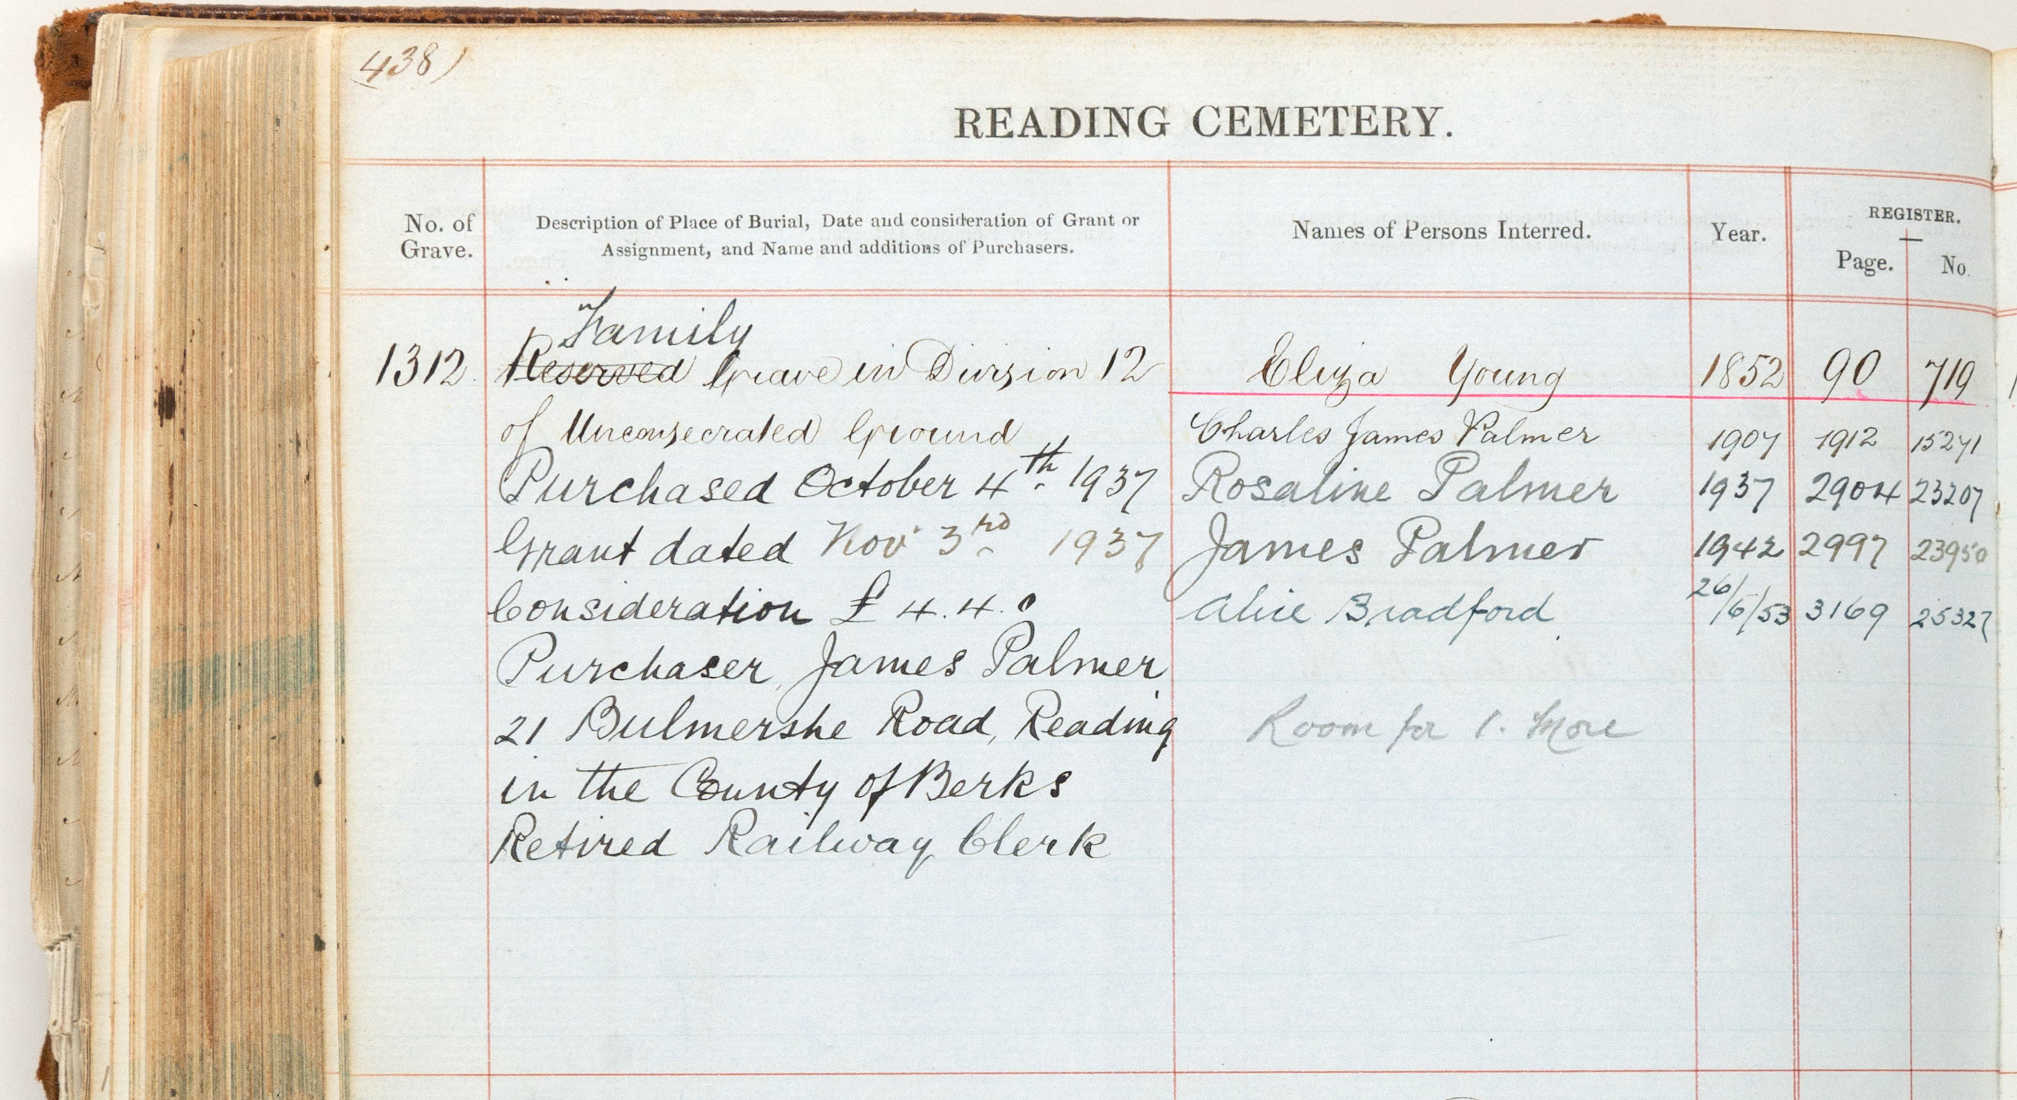 Photograph of entry 1312 in Register of Graves.